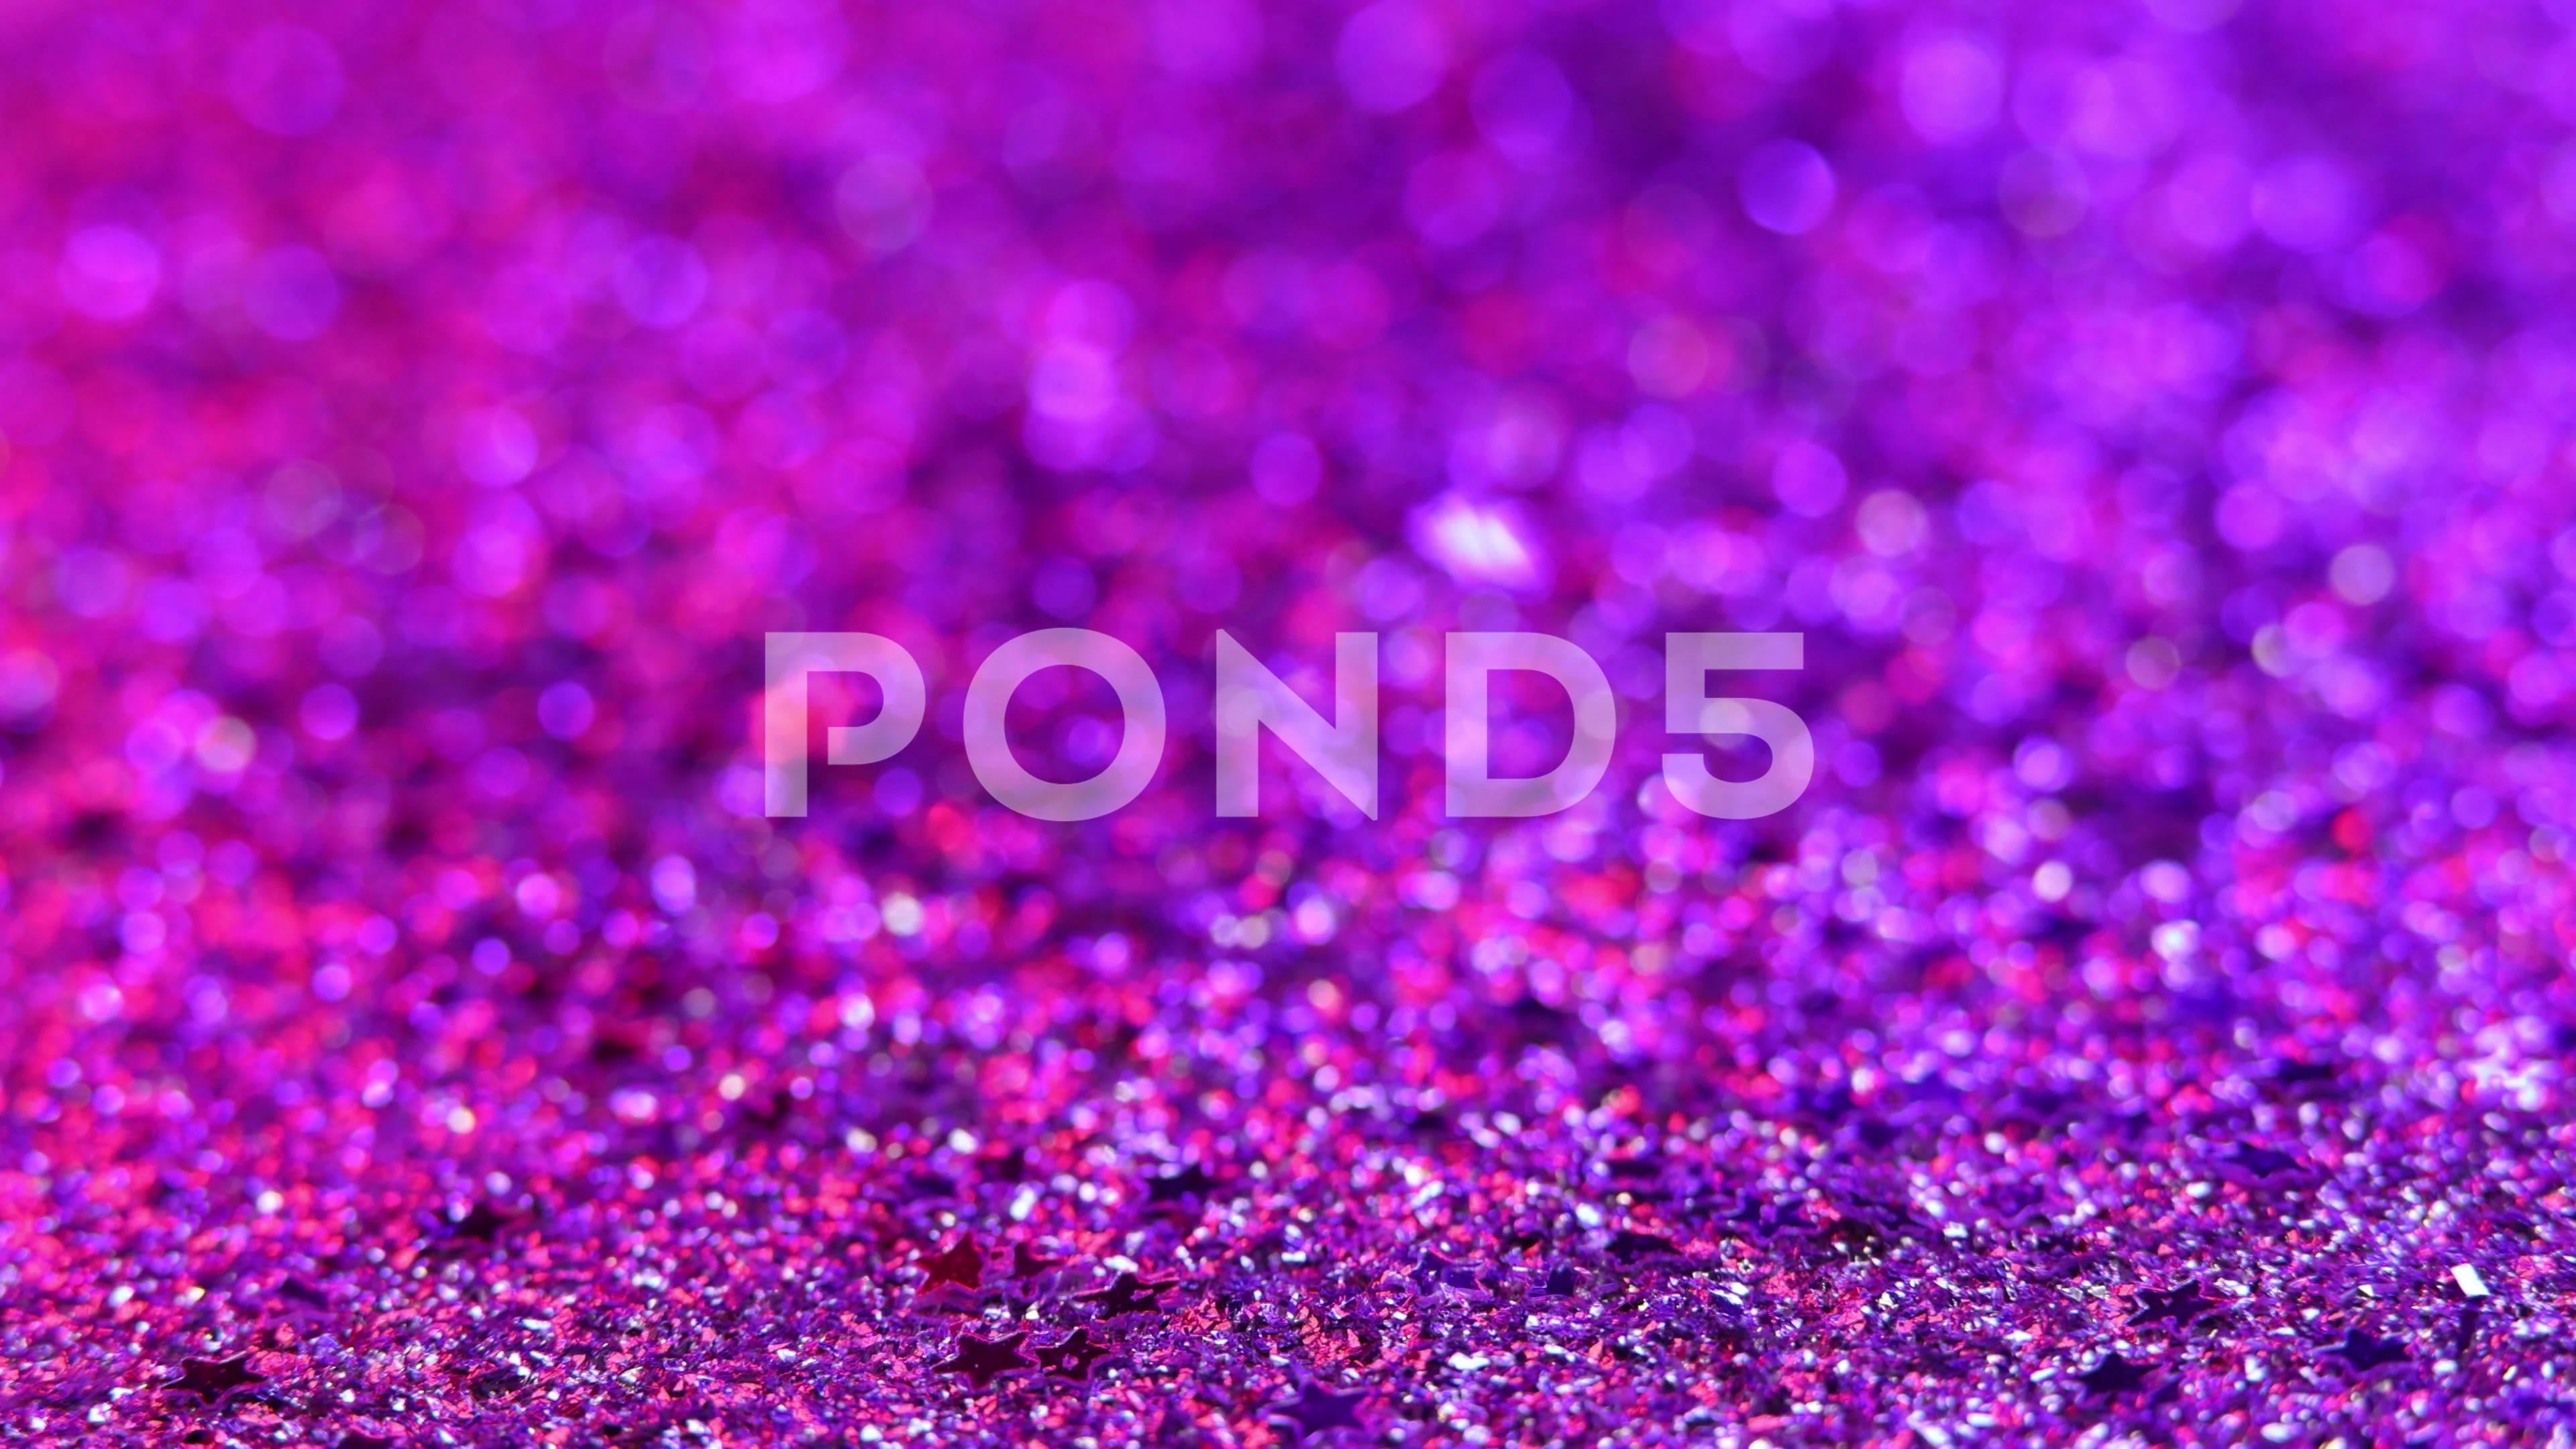 Moving Shiny Glitter Wallpaper Perfect Christmas Stock Footage Video 100  Royaltyfree 22659805  Shutterstock